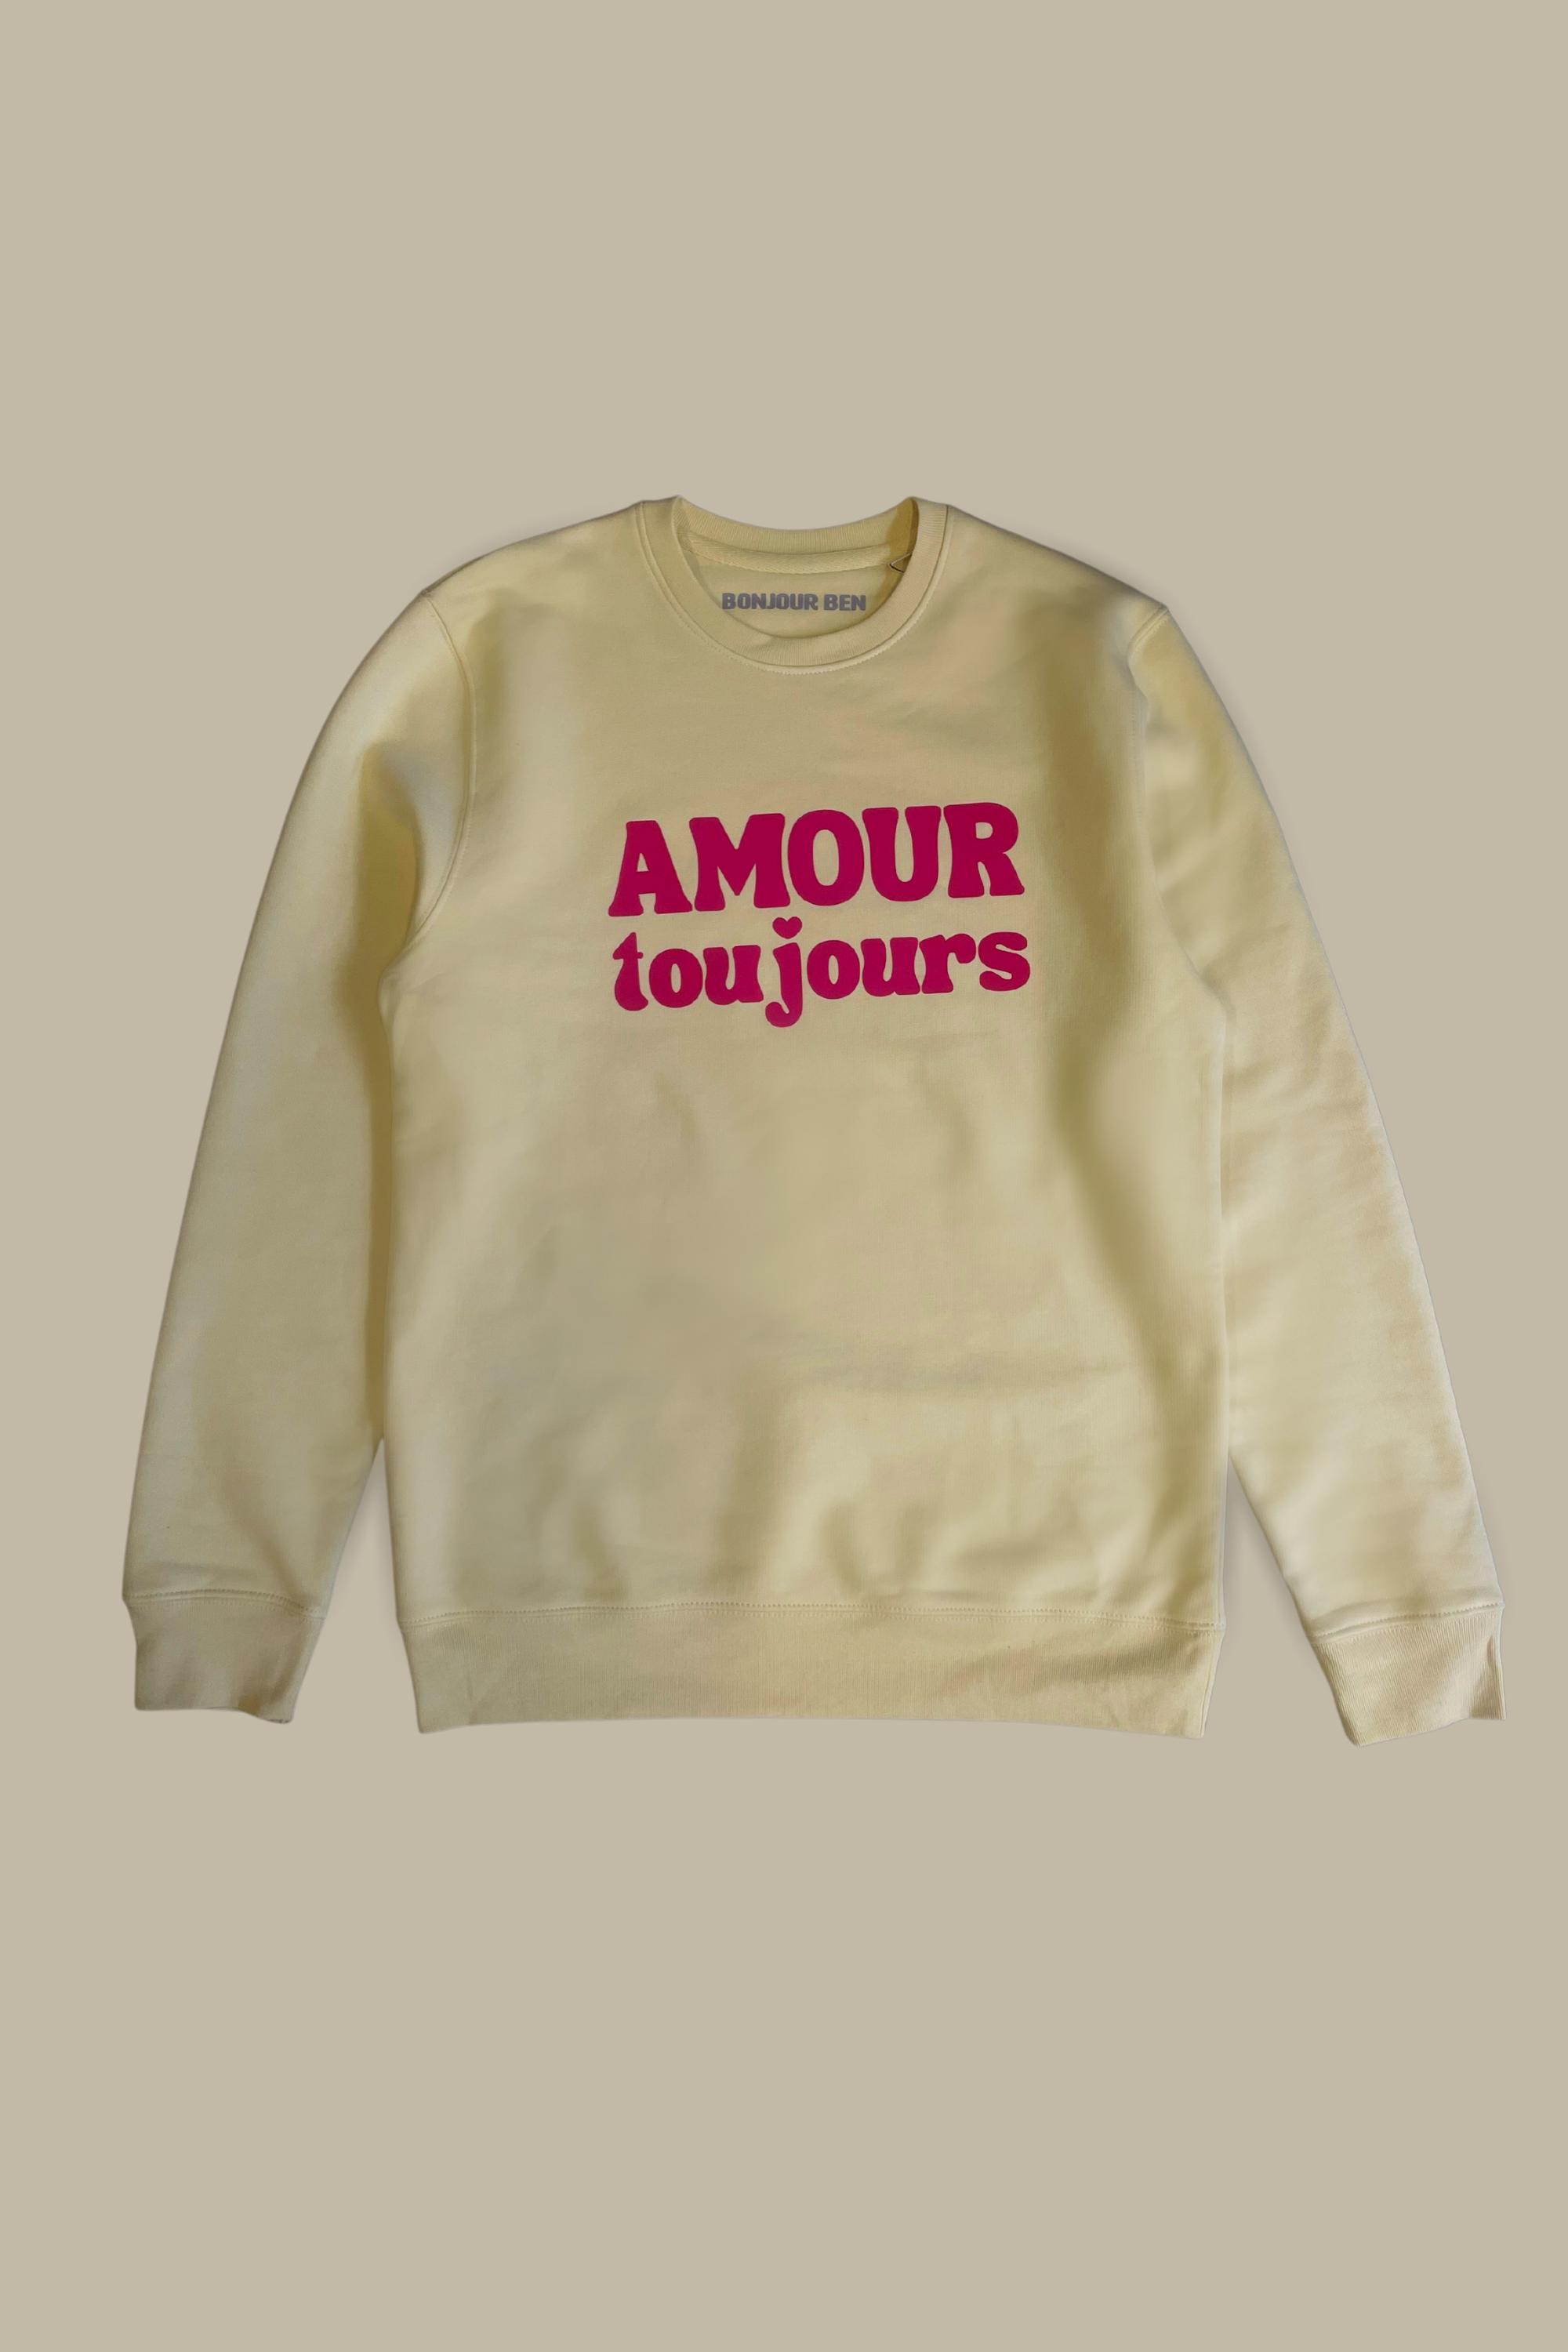 Amour toujours Sweatshirt - Pastell Gelb/Pink